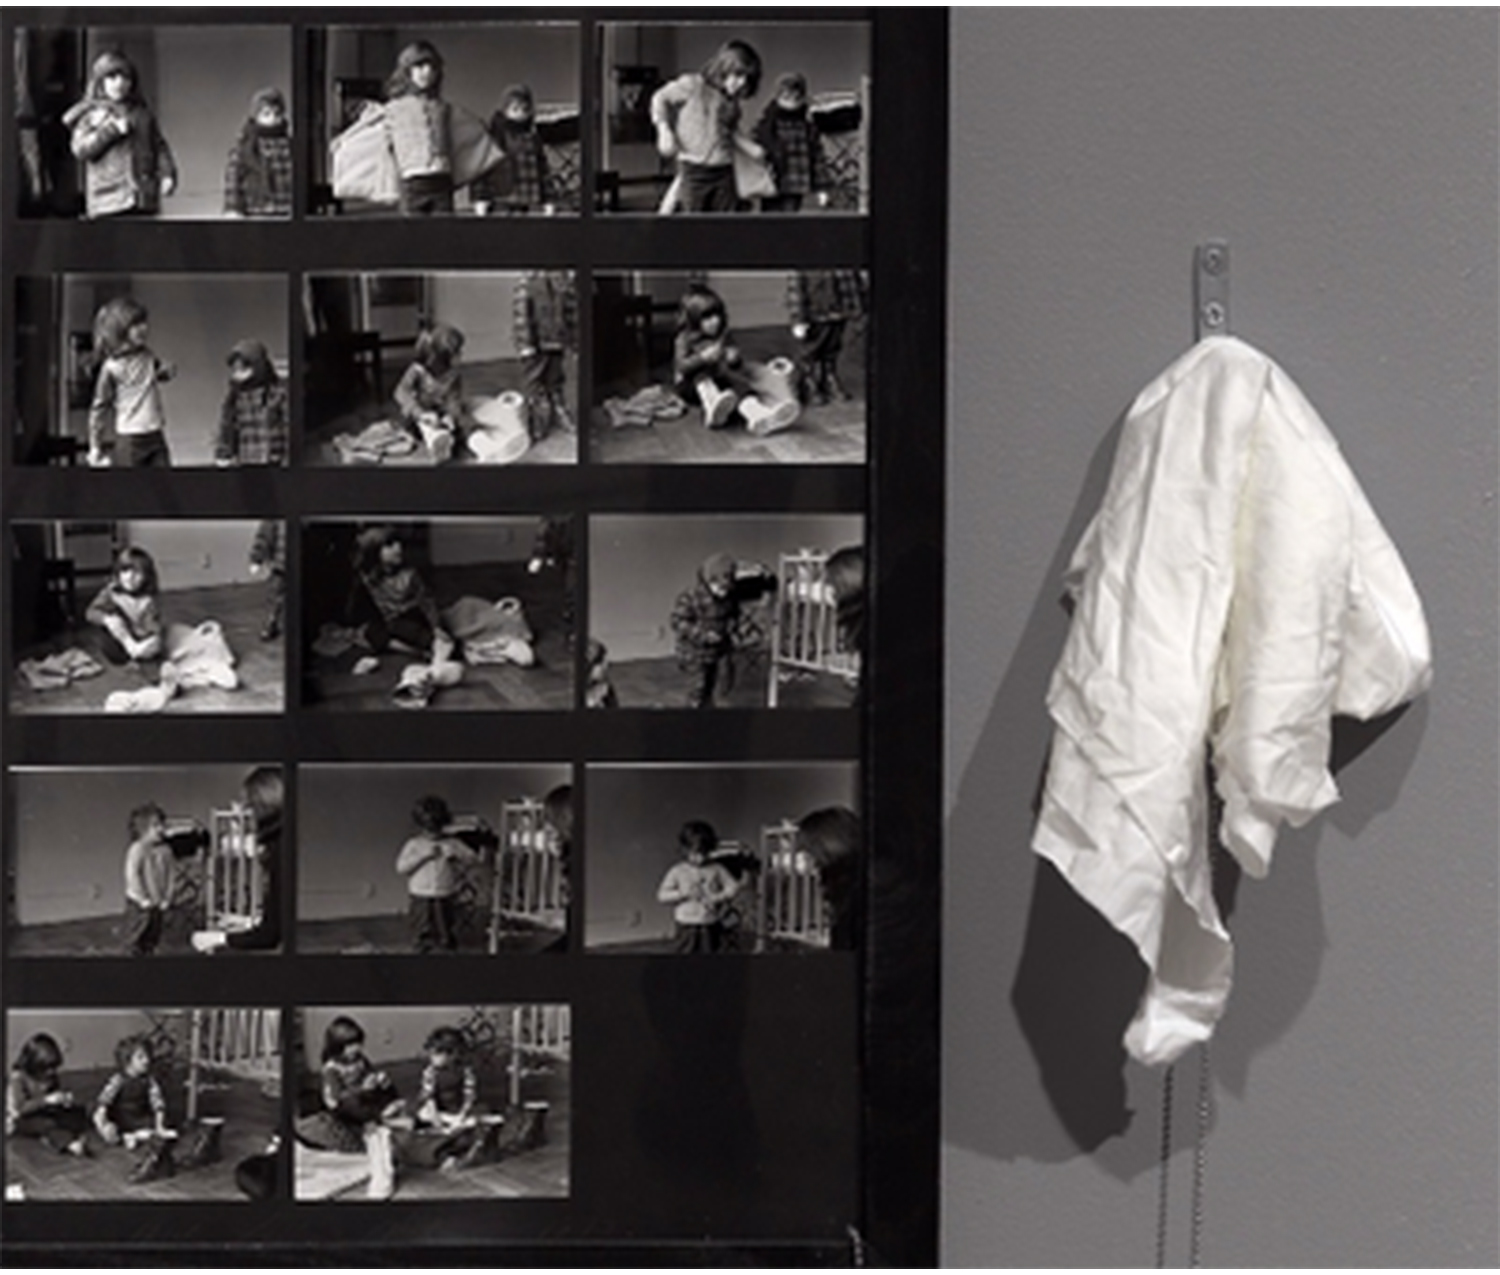 on the left, the edge of an artwork containing black and white images of children getting dressed; on the right, a white rag hanging from a chain